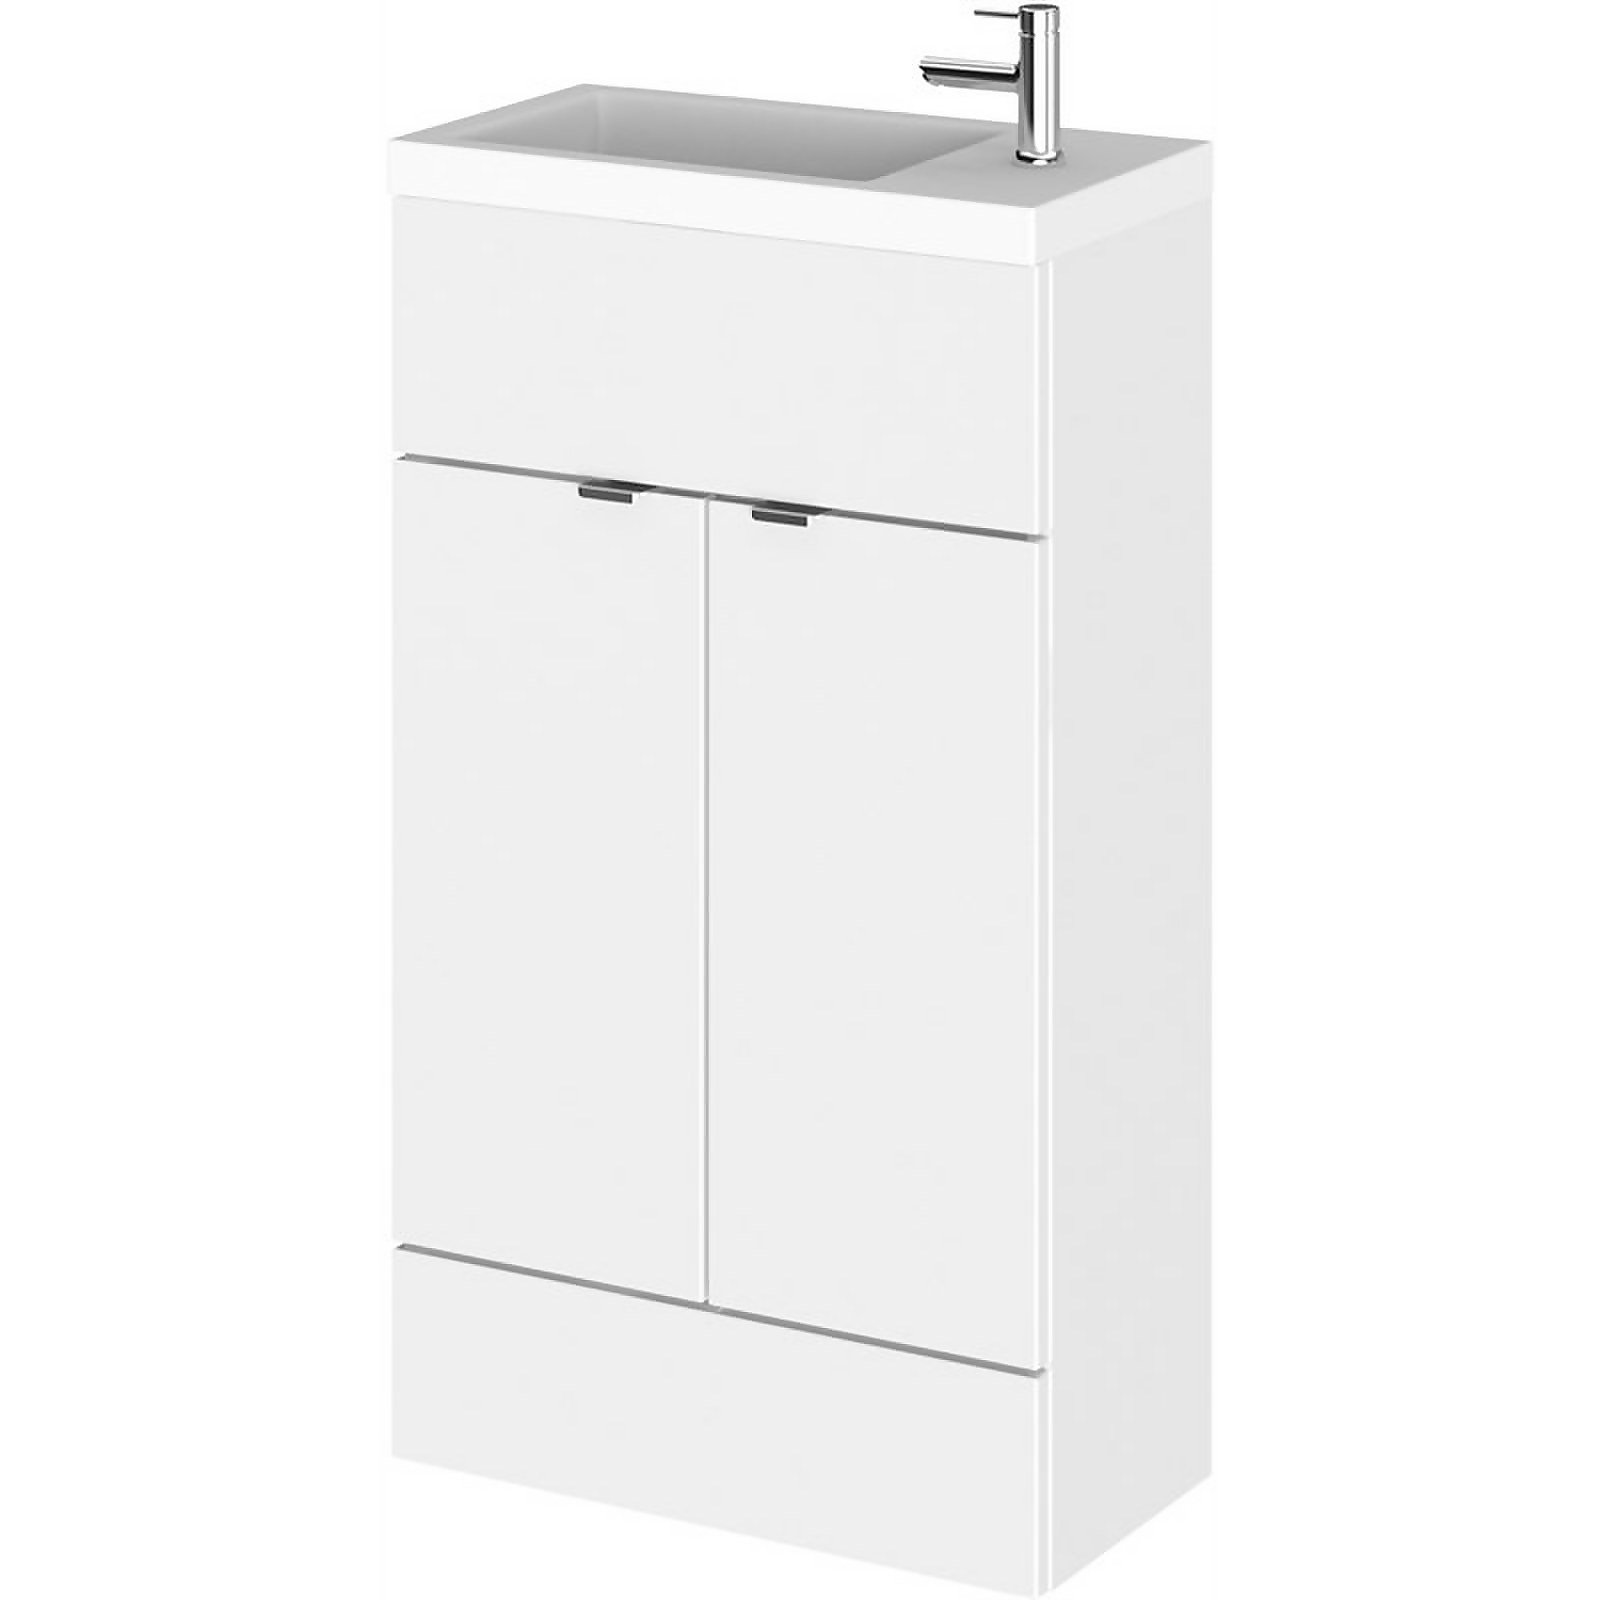 Balterley Dynamic 500mm Compact Vanity Unit with Basin - Gloss White